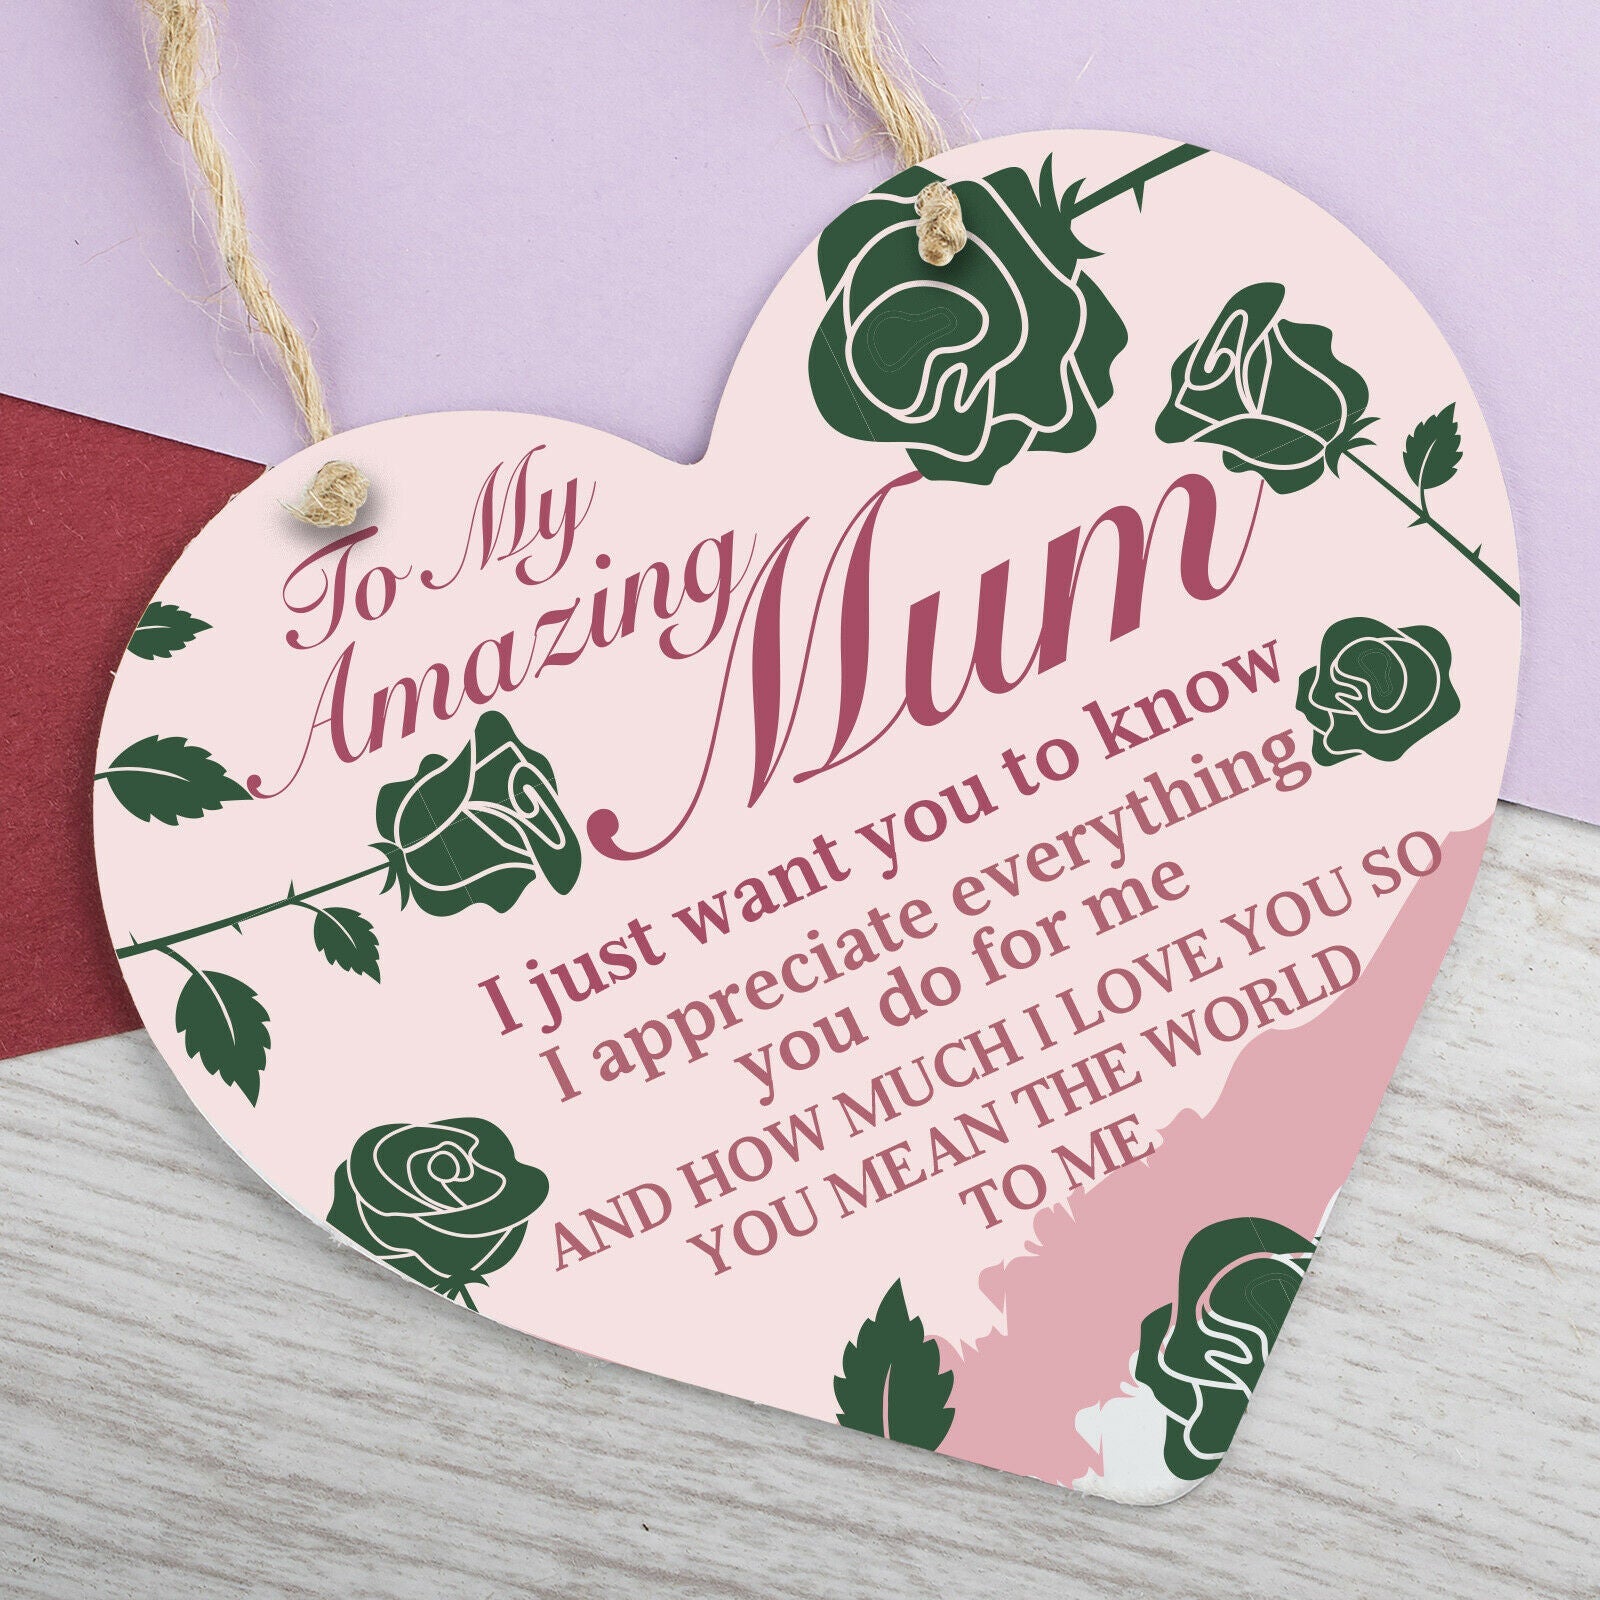 I Love You Mothers Day Gifts Mum Hanging Heart Plaque Sign